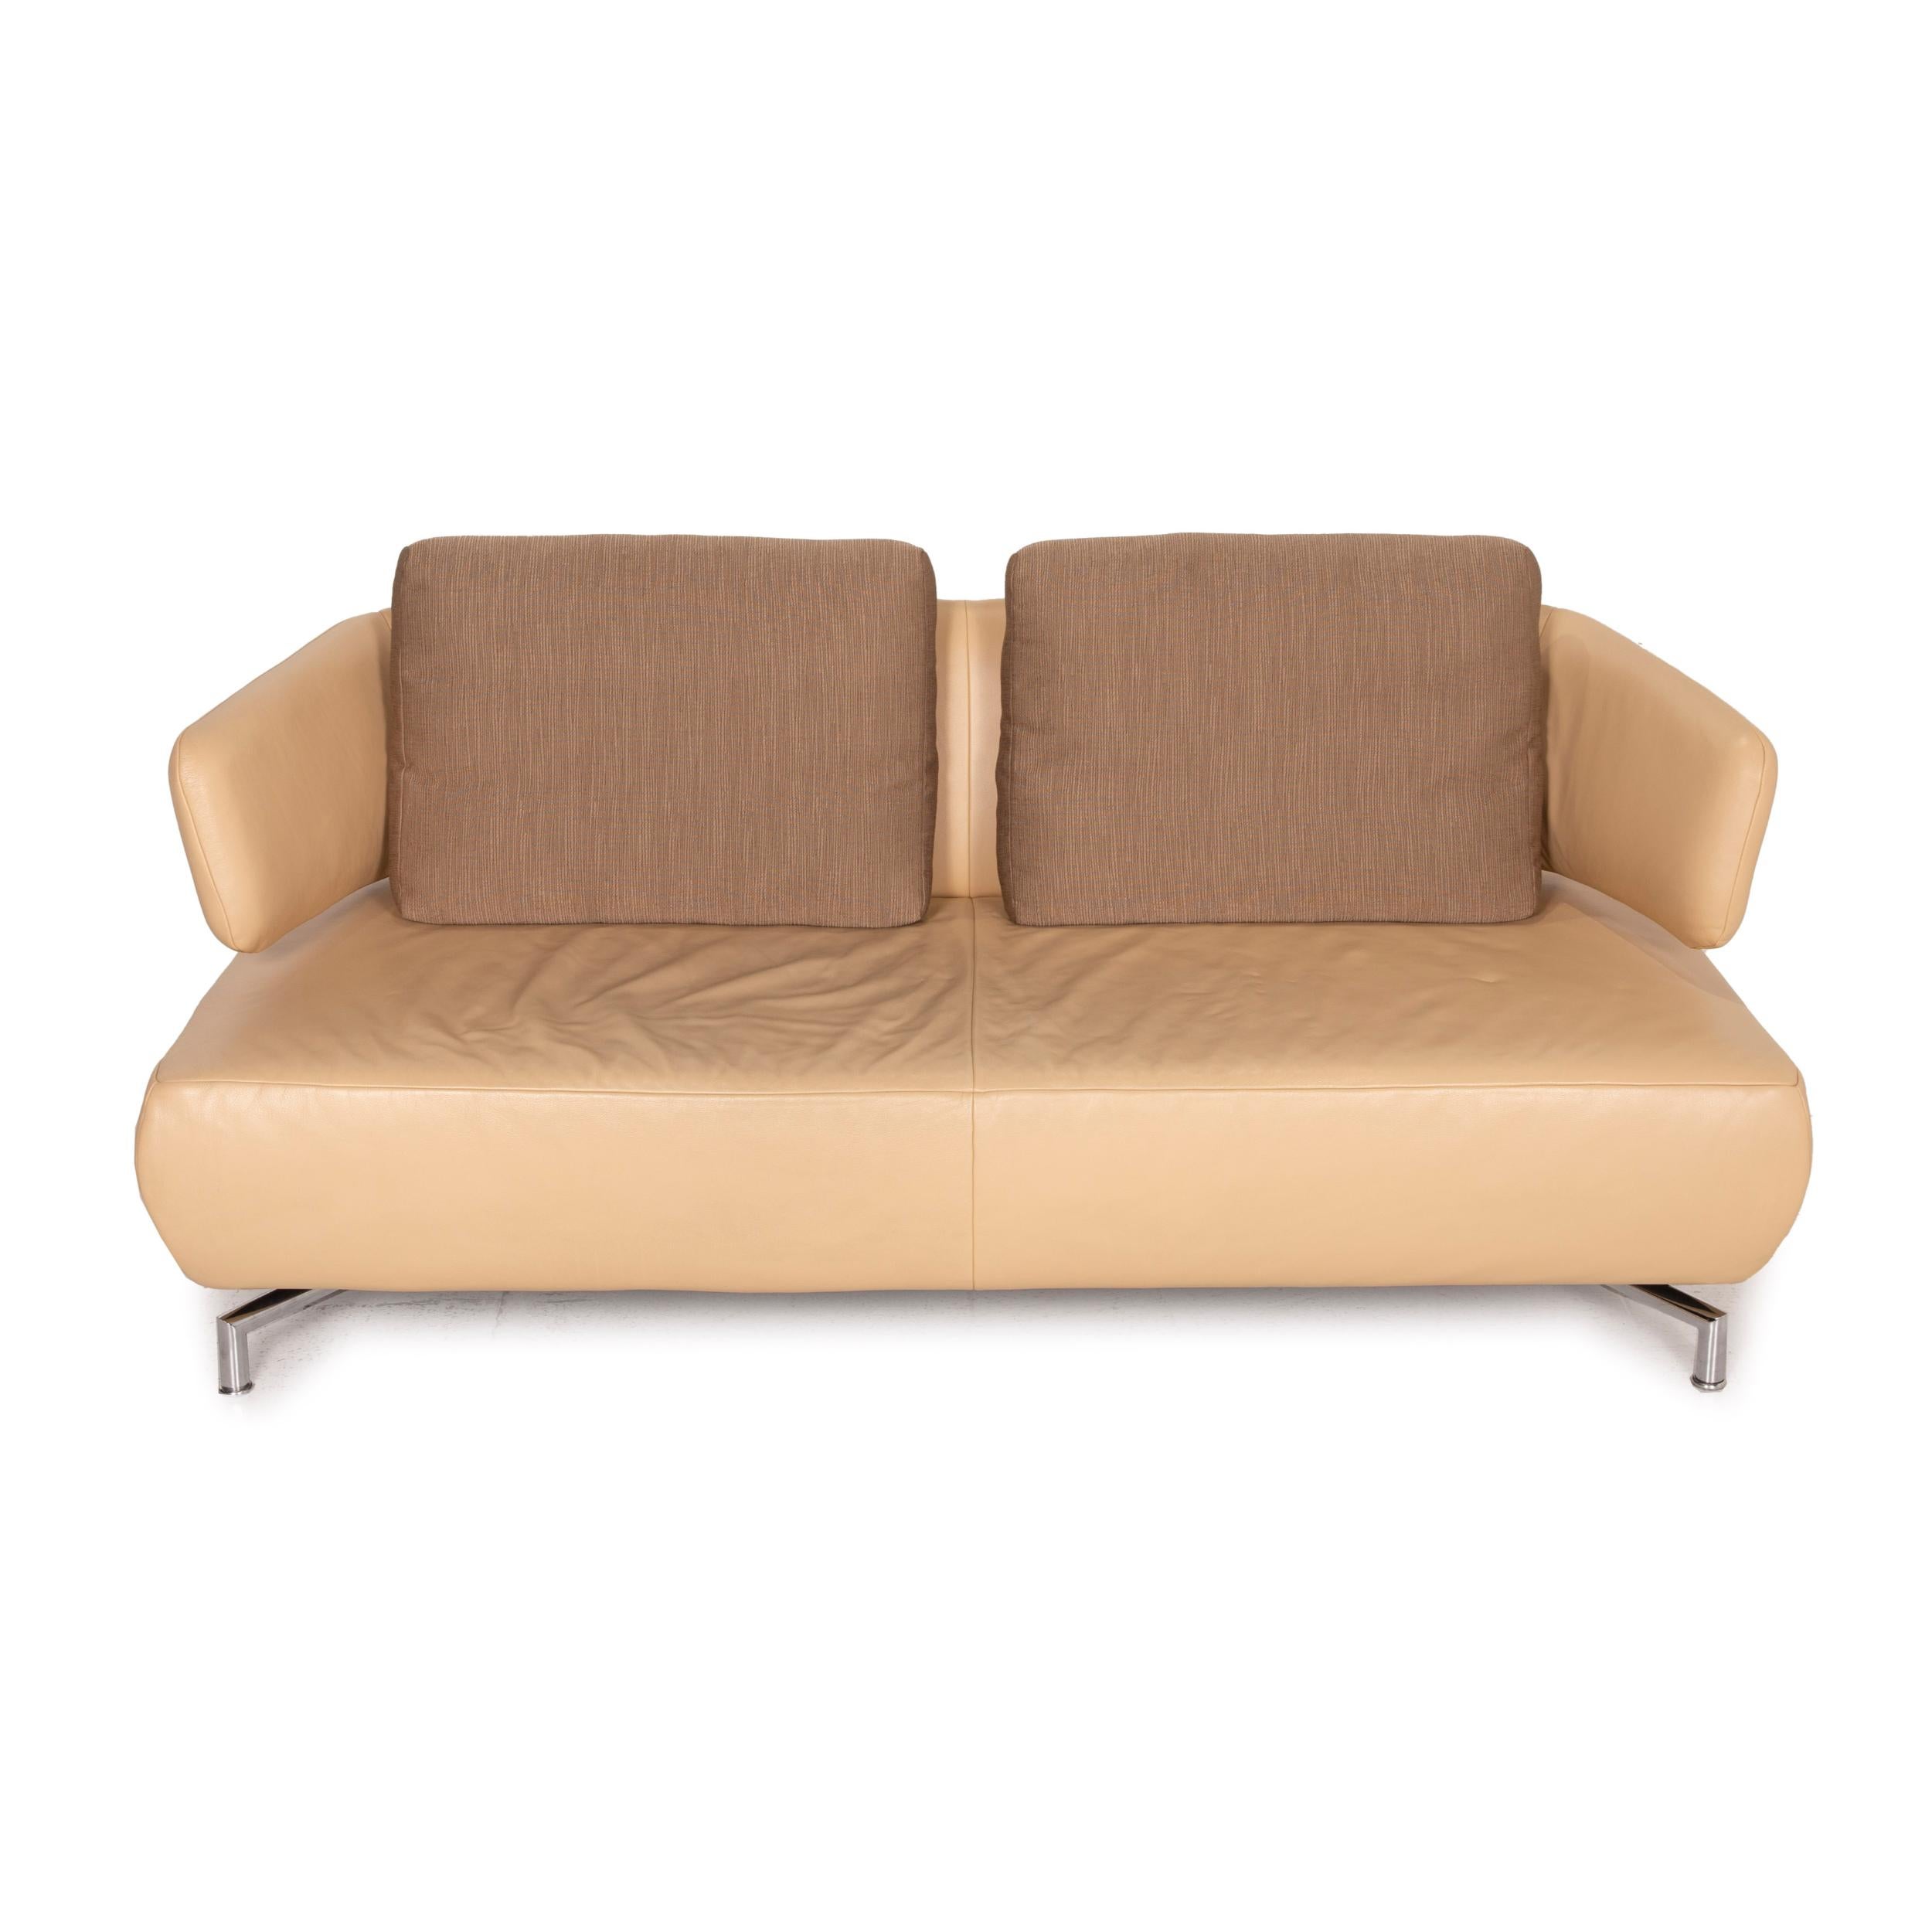 Koinor Leather Sofa Beige Two-Seater Fabric For Sale 1